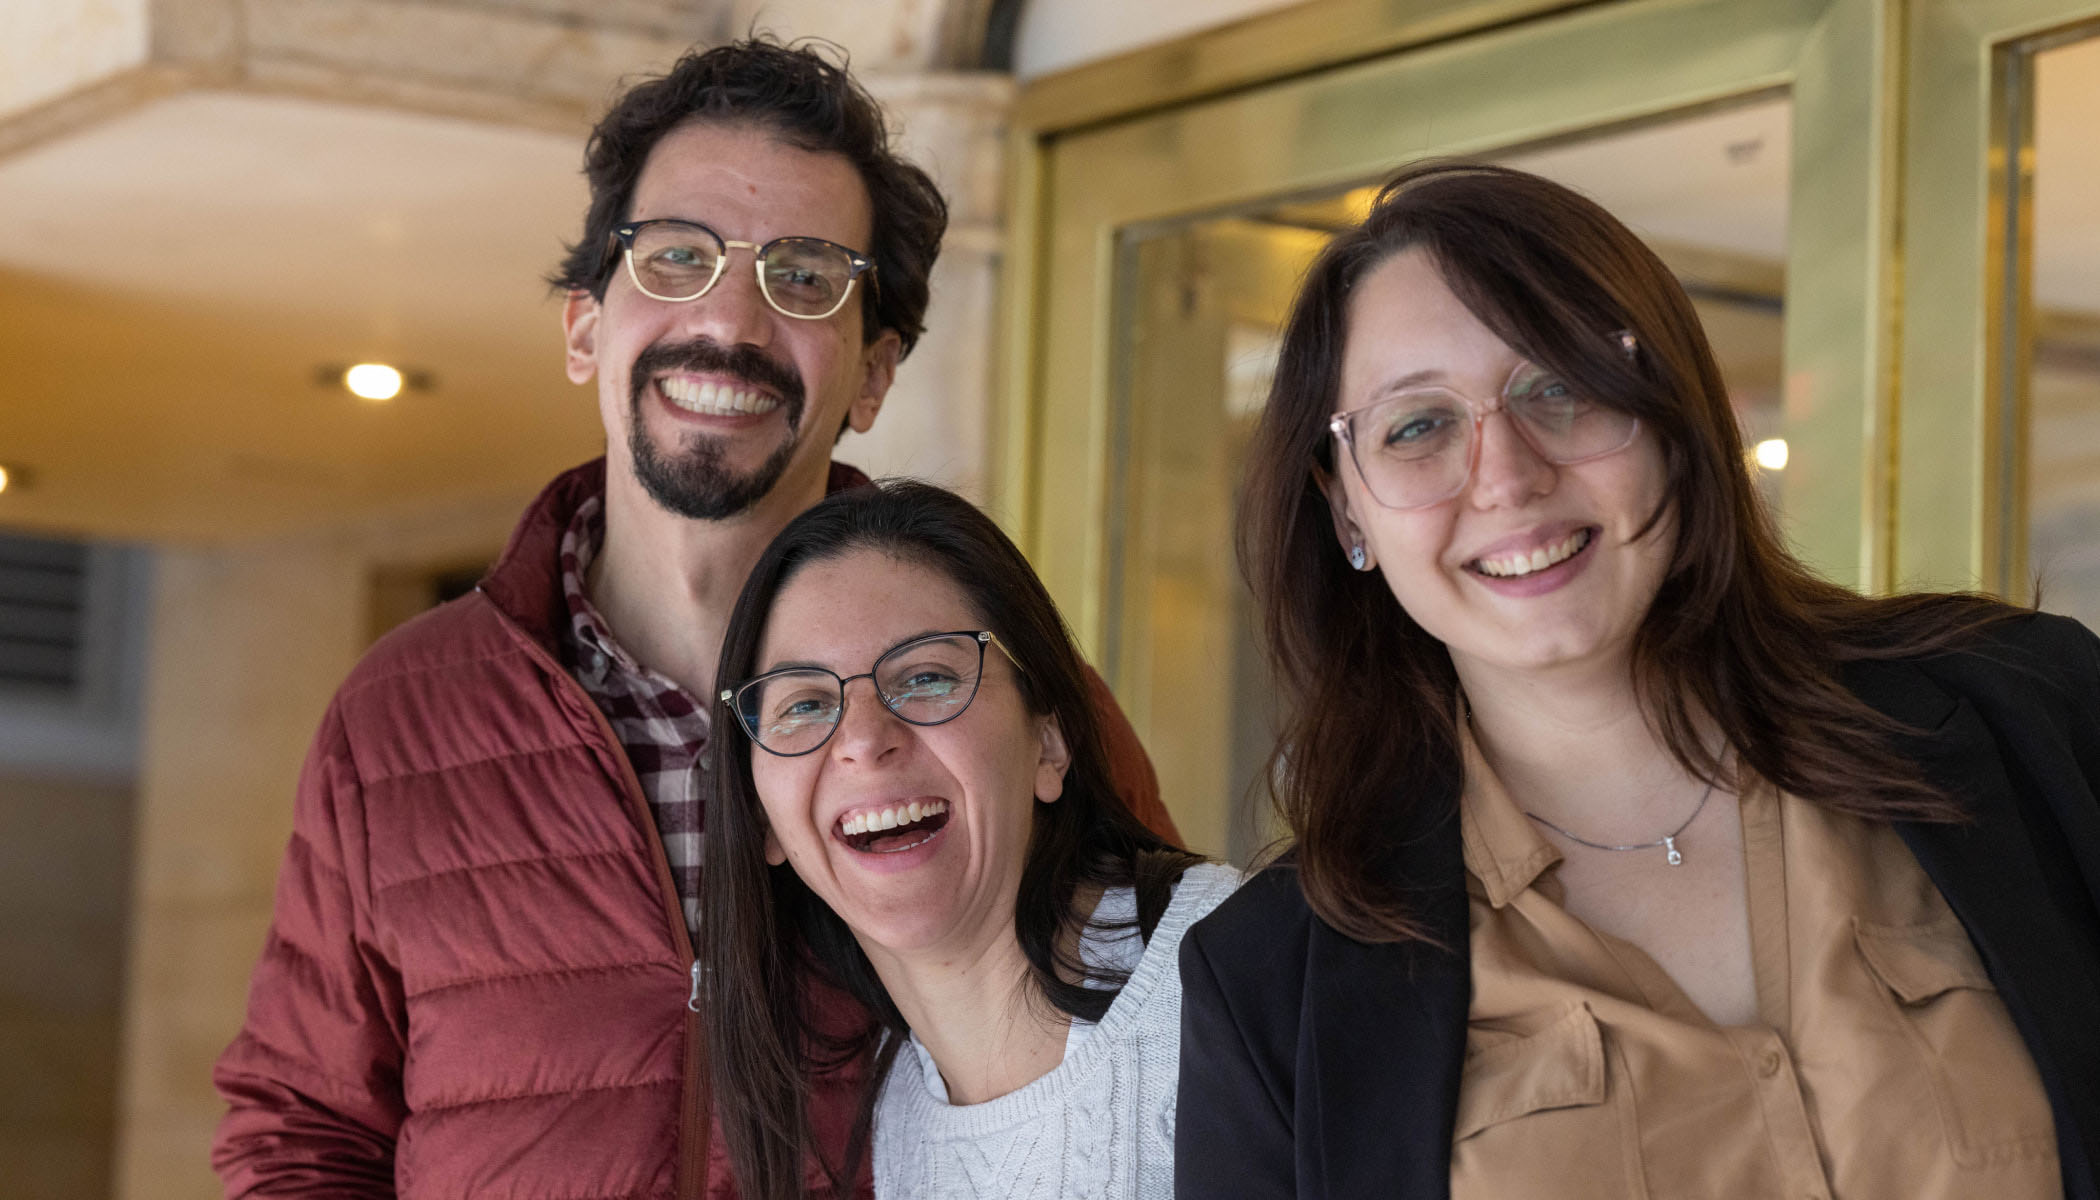 Three people with glasses smile for a group photo at an open science conference.